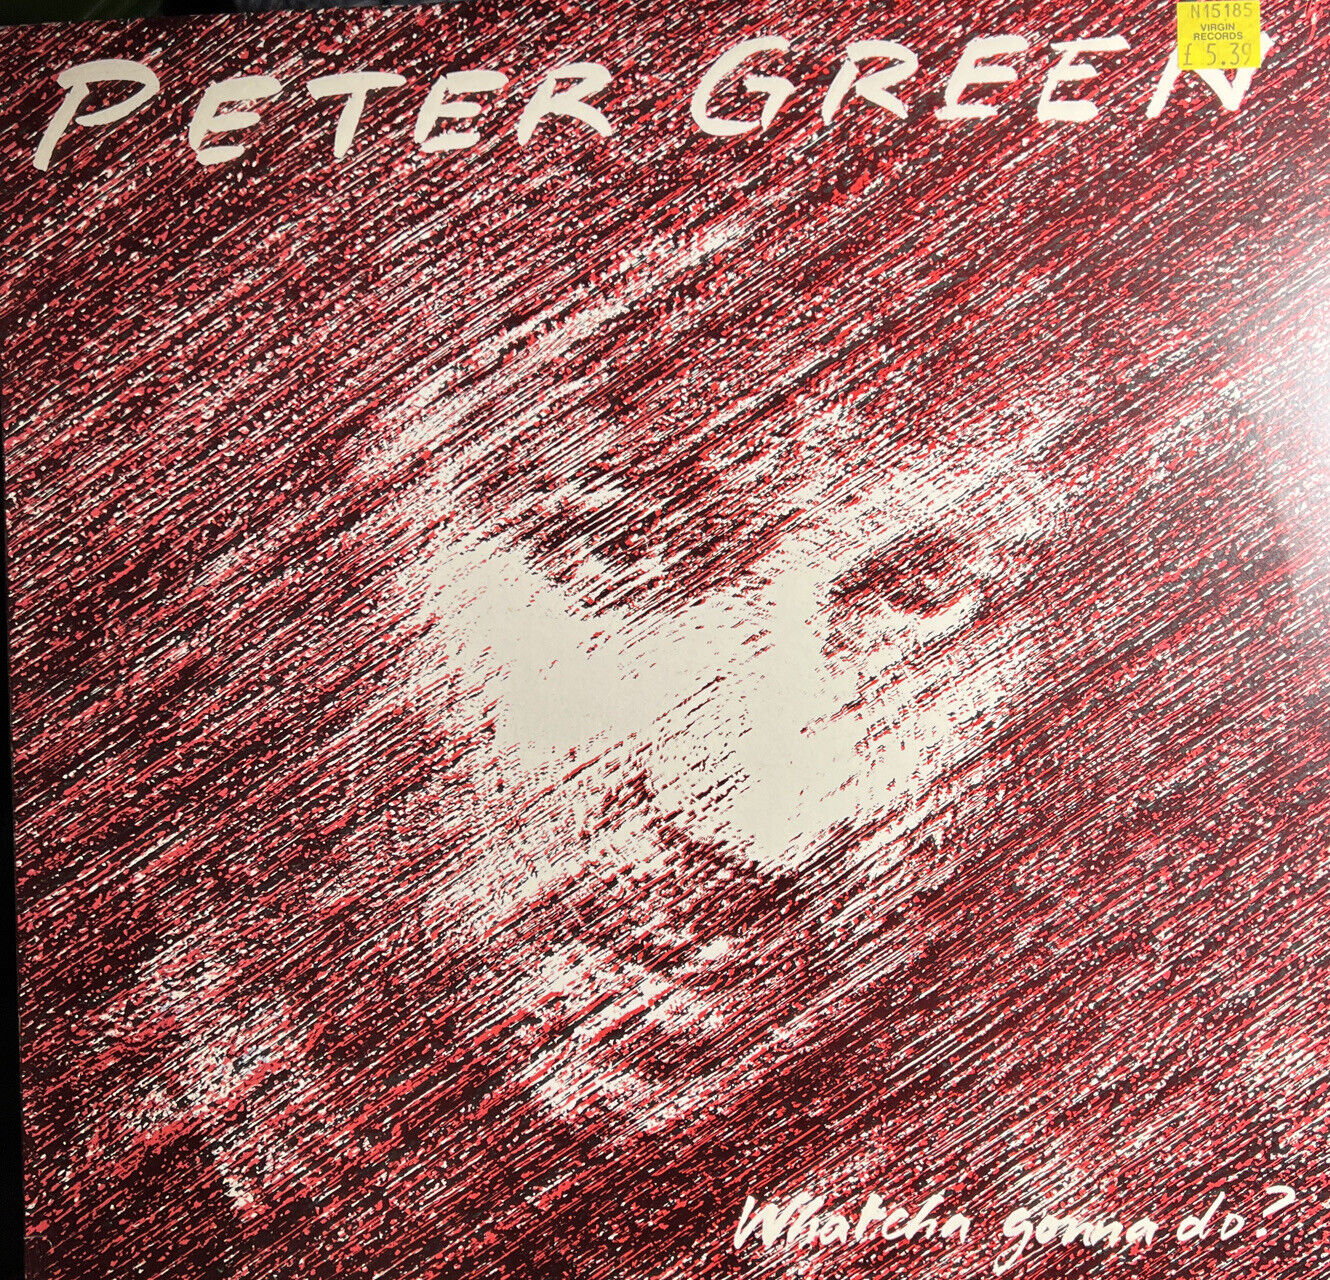 Peter Green – Whatcha Gonna Do? - SIGNED IMPORT VINYL RECORD FIRST PRESS LP